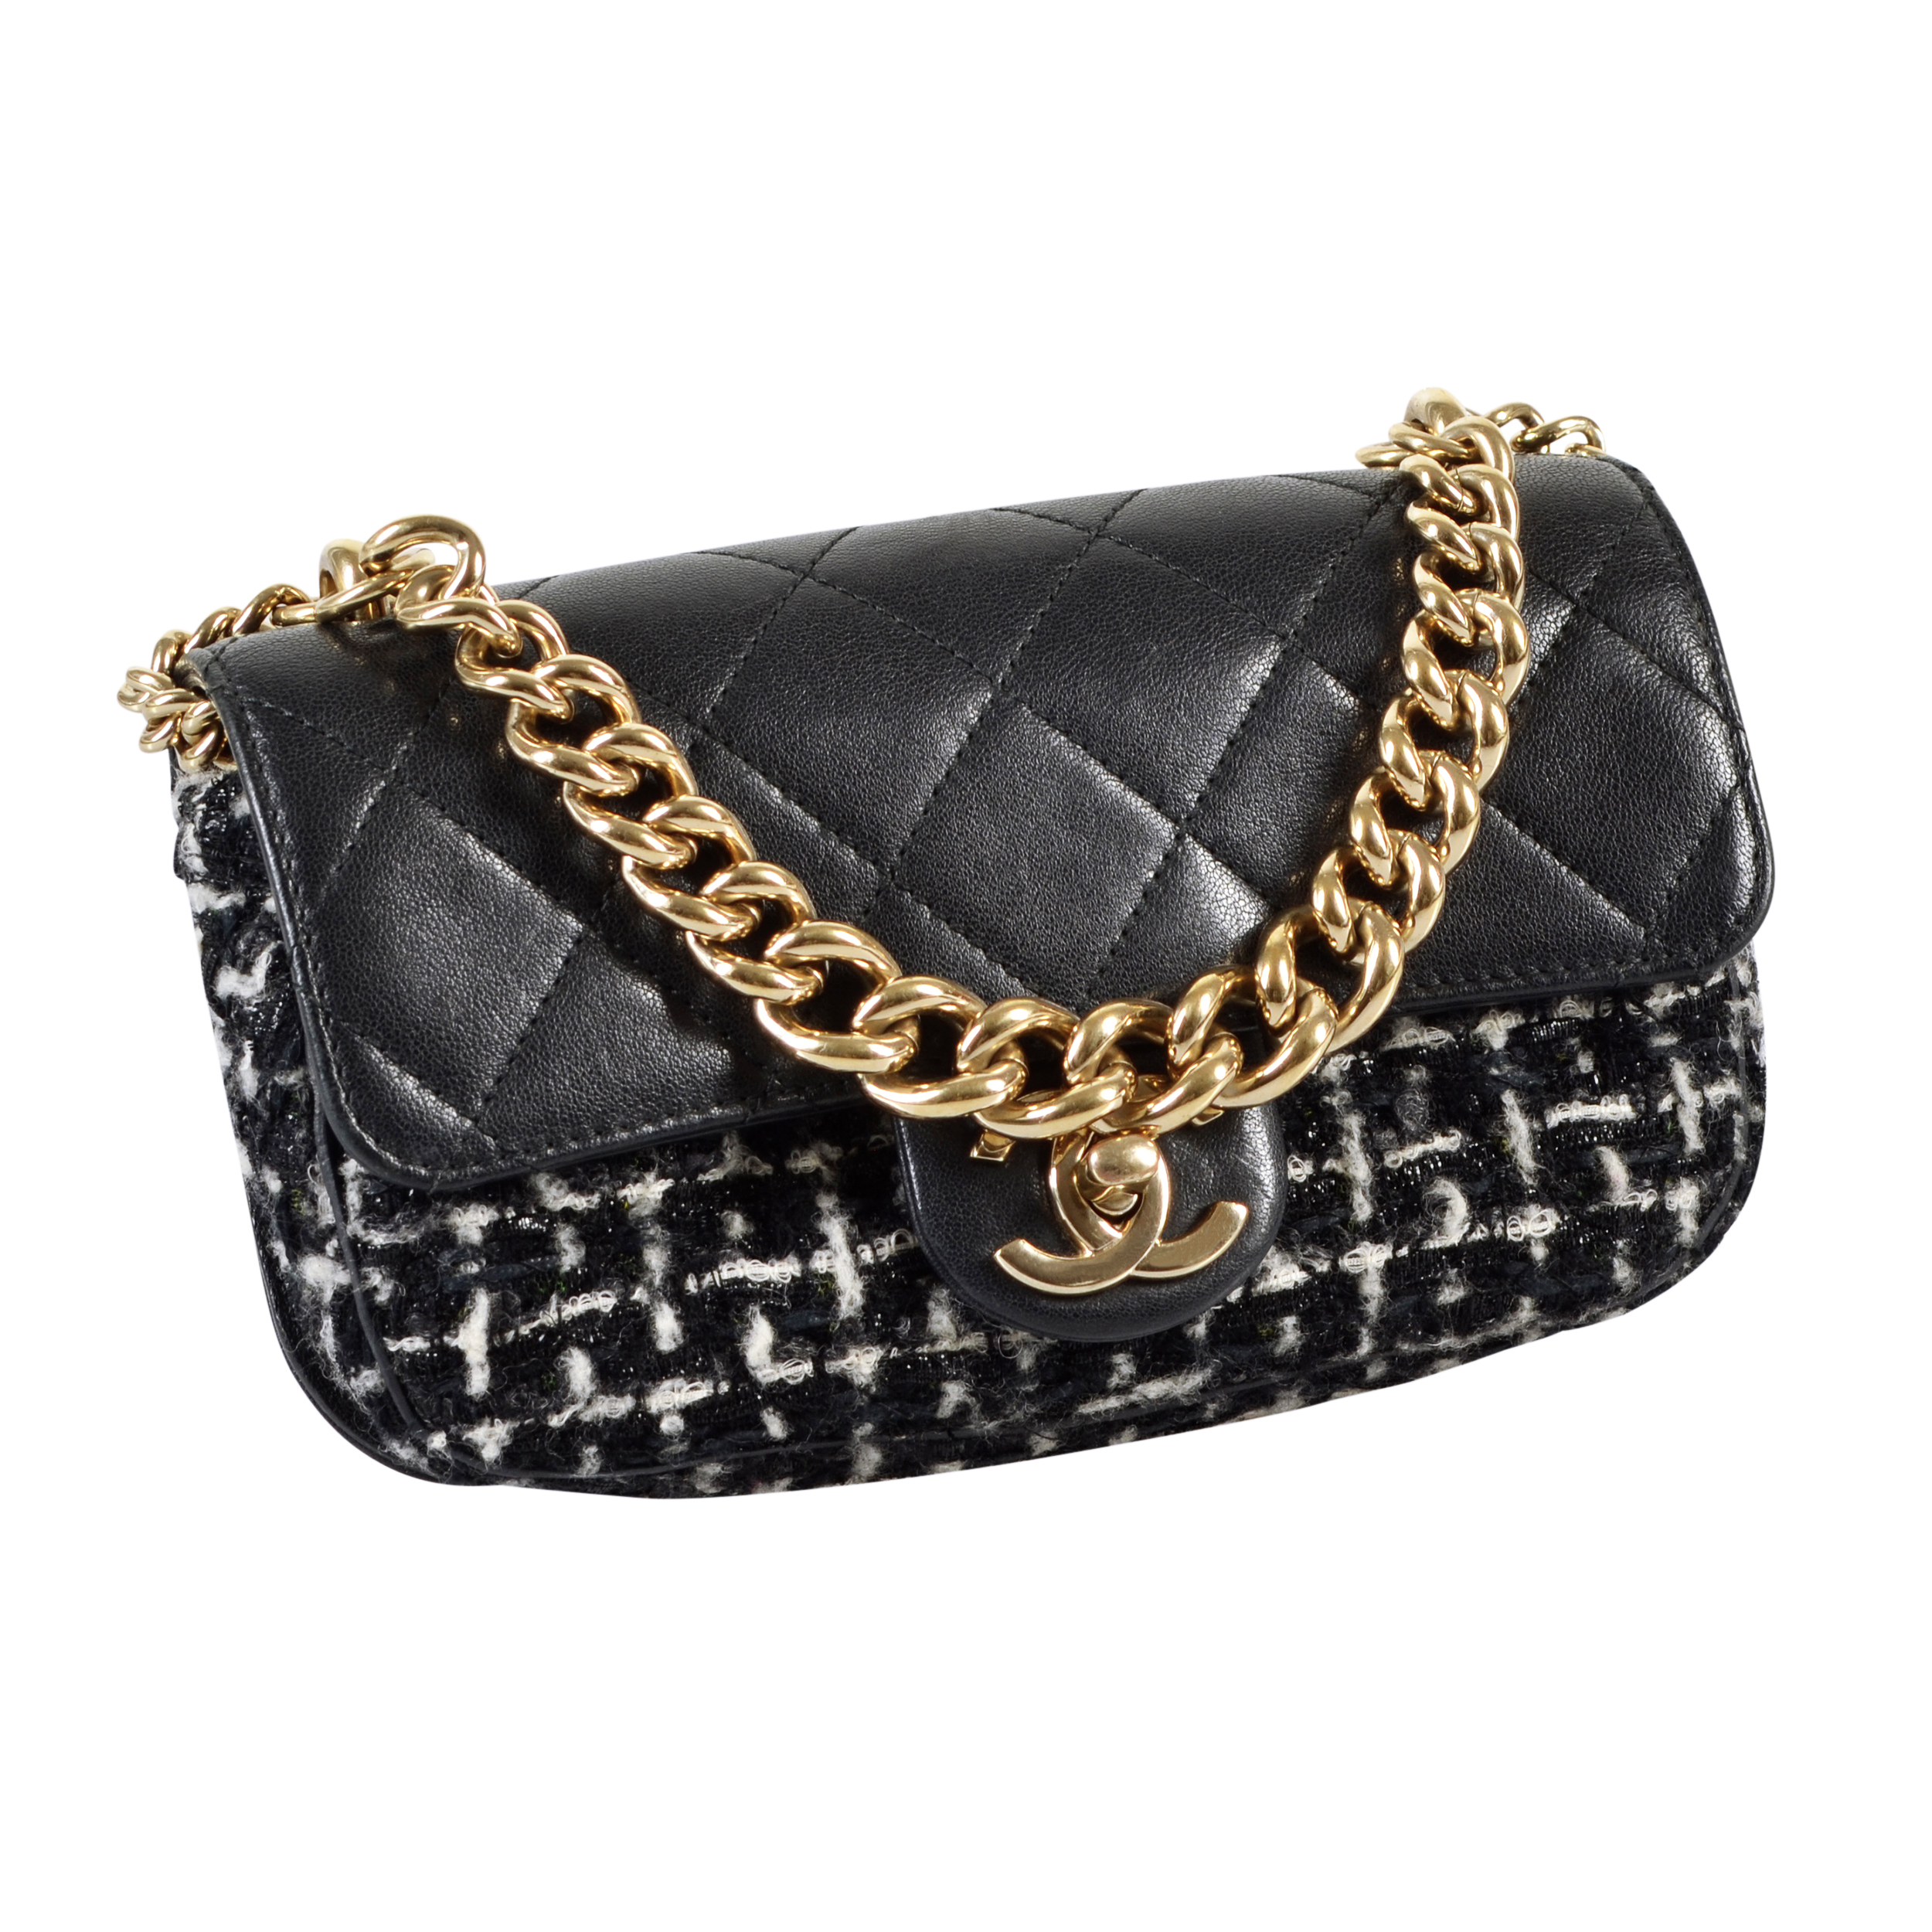 CHANEL Small Tweed Flap Bag Handtasche - MyLovelyBoutique